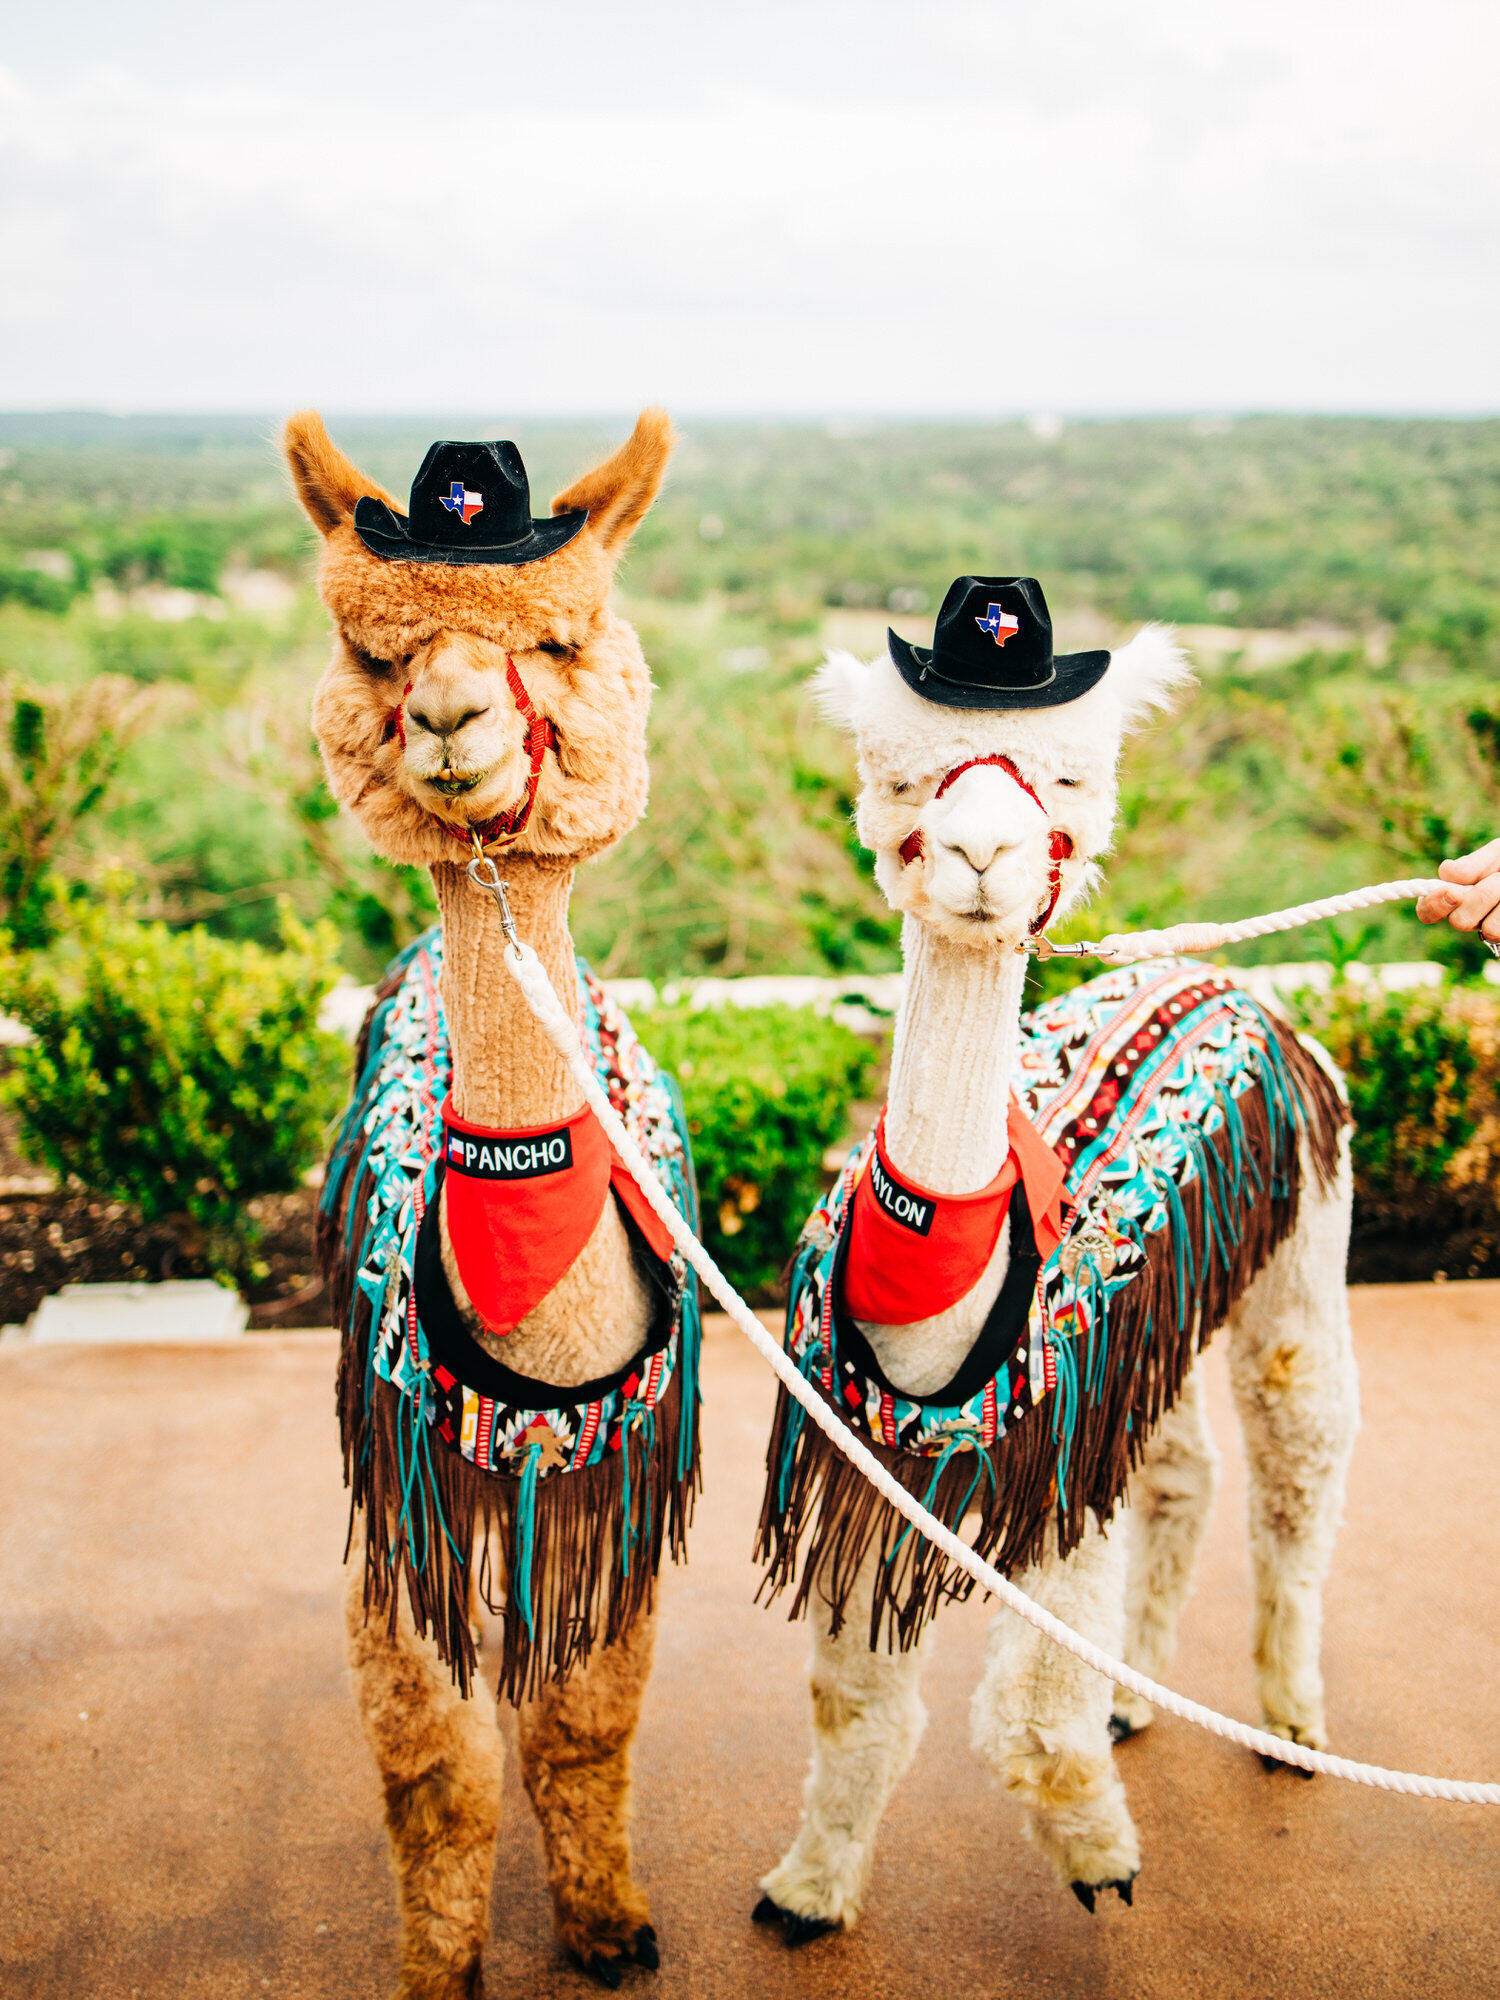 An image of a brown/tan alpaca and a white alpaca with rolling hills  behind them. The alpacas are attending a wedding as entertainment, and are wearing cowboy hats and colorful blankets.